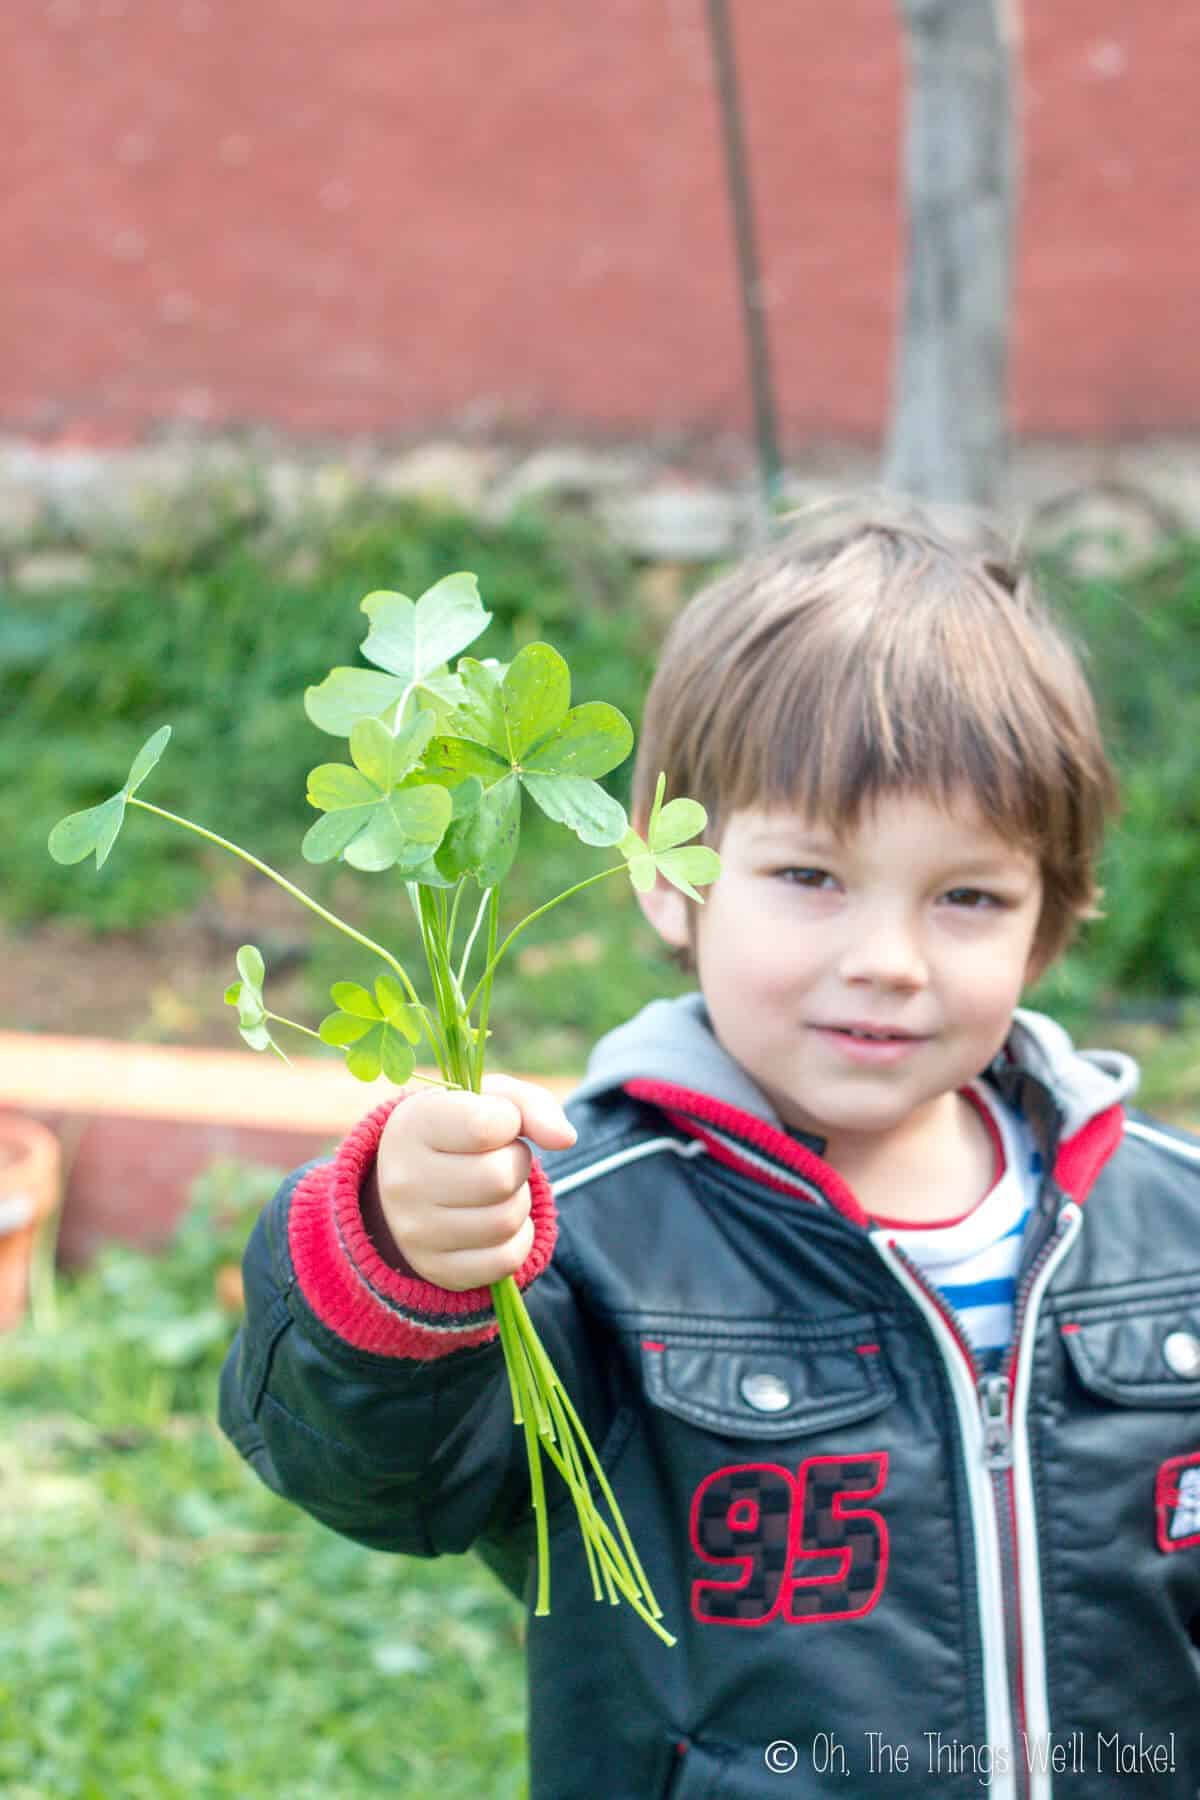 A young boy holding a bunch of clovers in his hand, ready to use them for a fun St. Patrick's Day project.